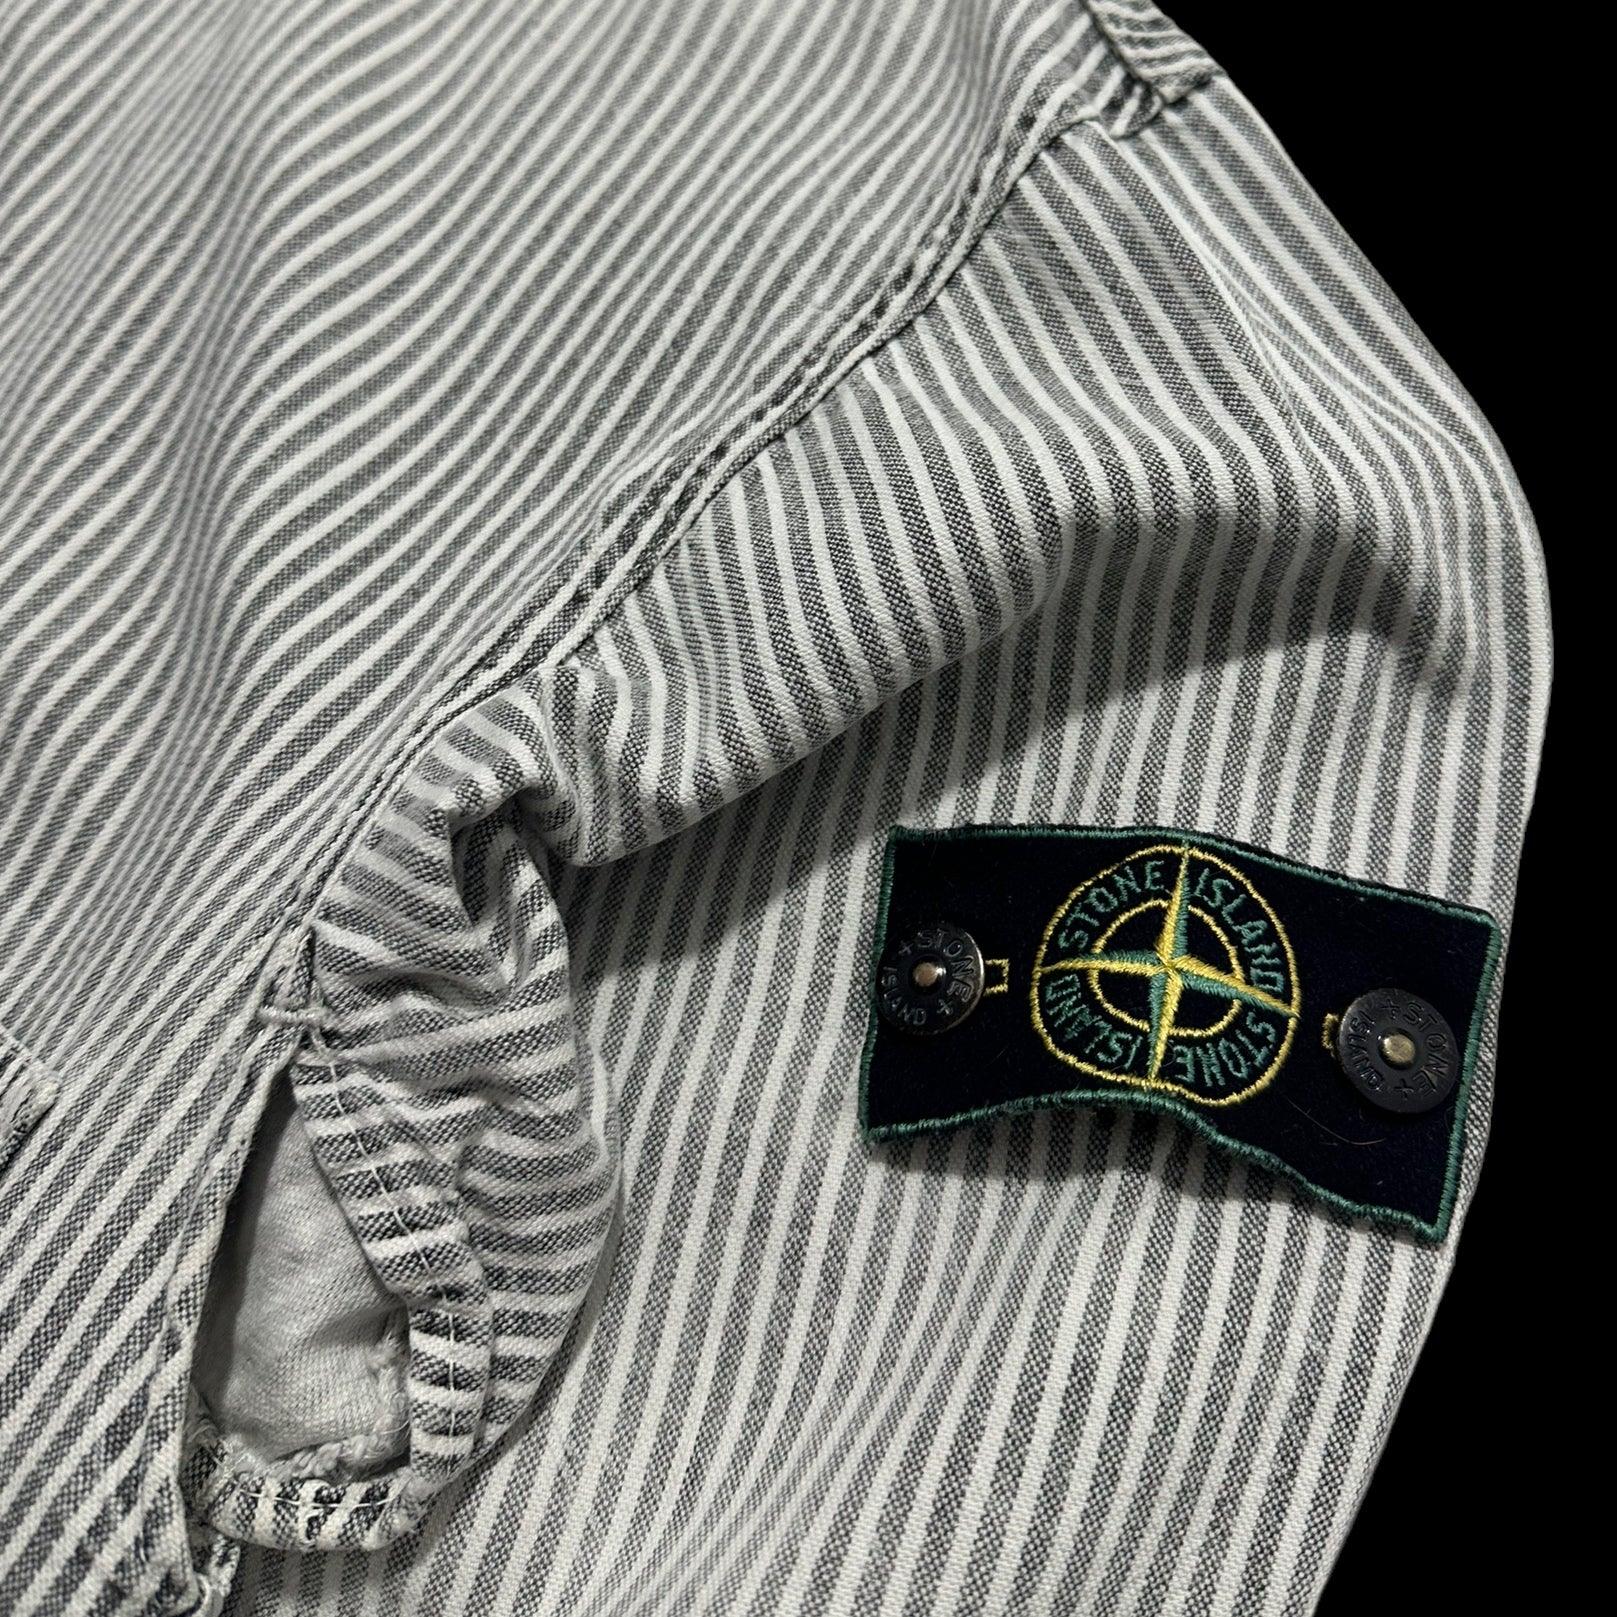 Stone Island 1986 Pigment Striped Chore Jacket with Green Edge Badge - Known Source